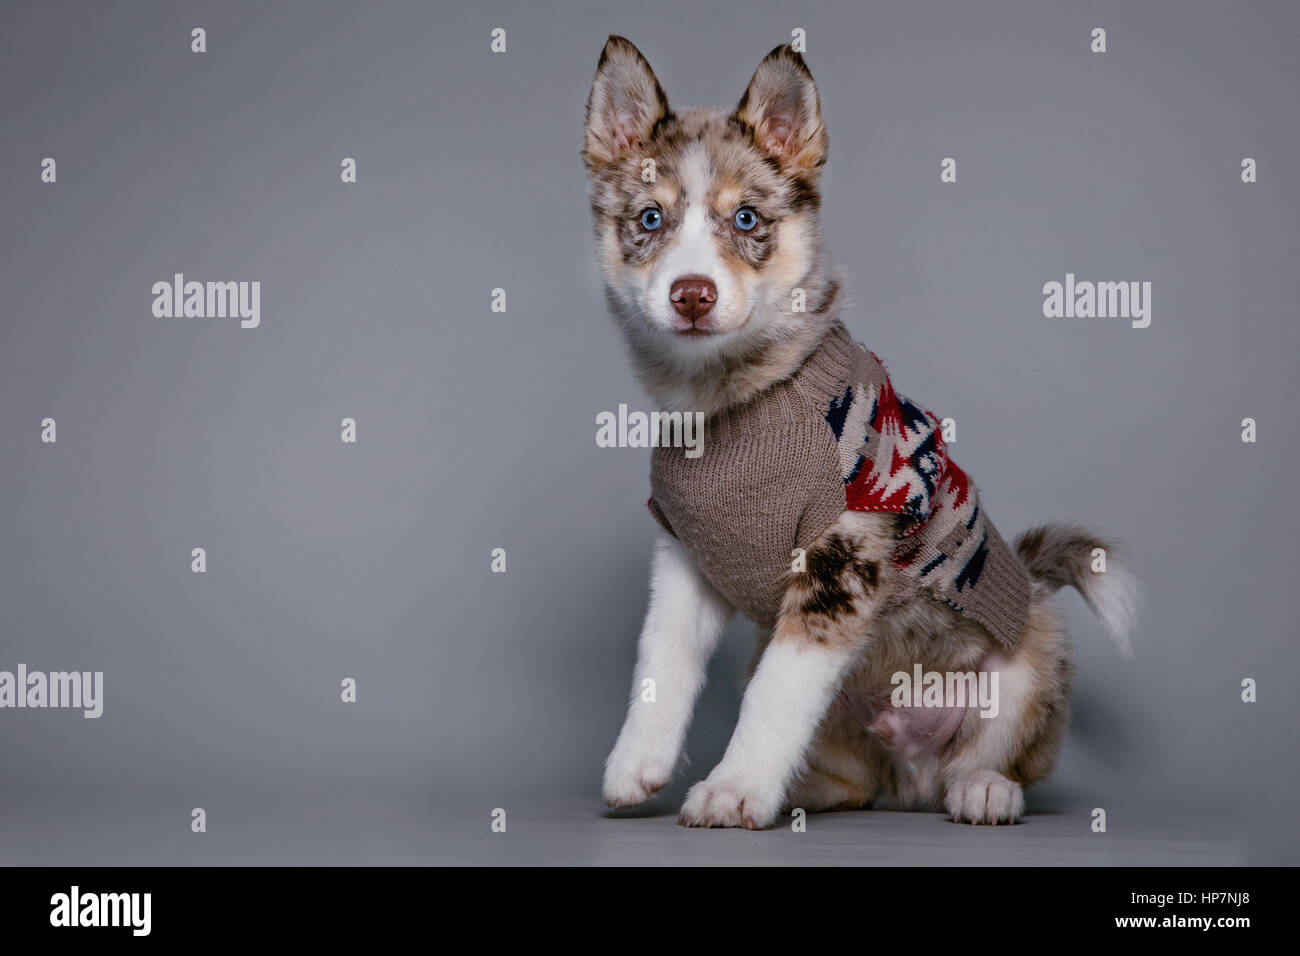 Full-body studio portrait of an adorable pomsky puppy wearing a Navajo sweater. Stock Photo